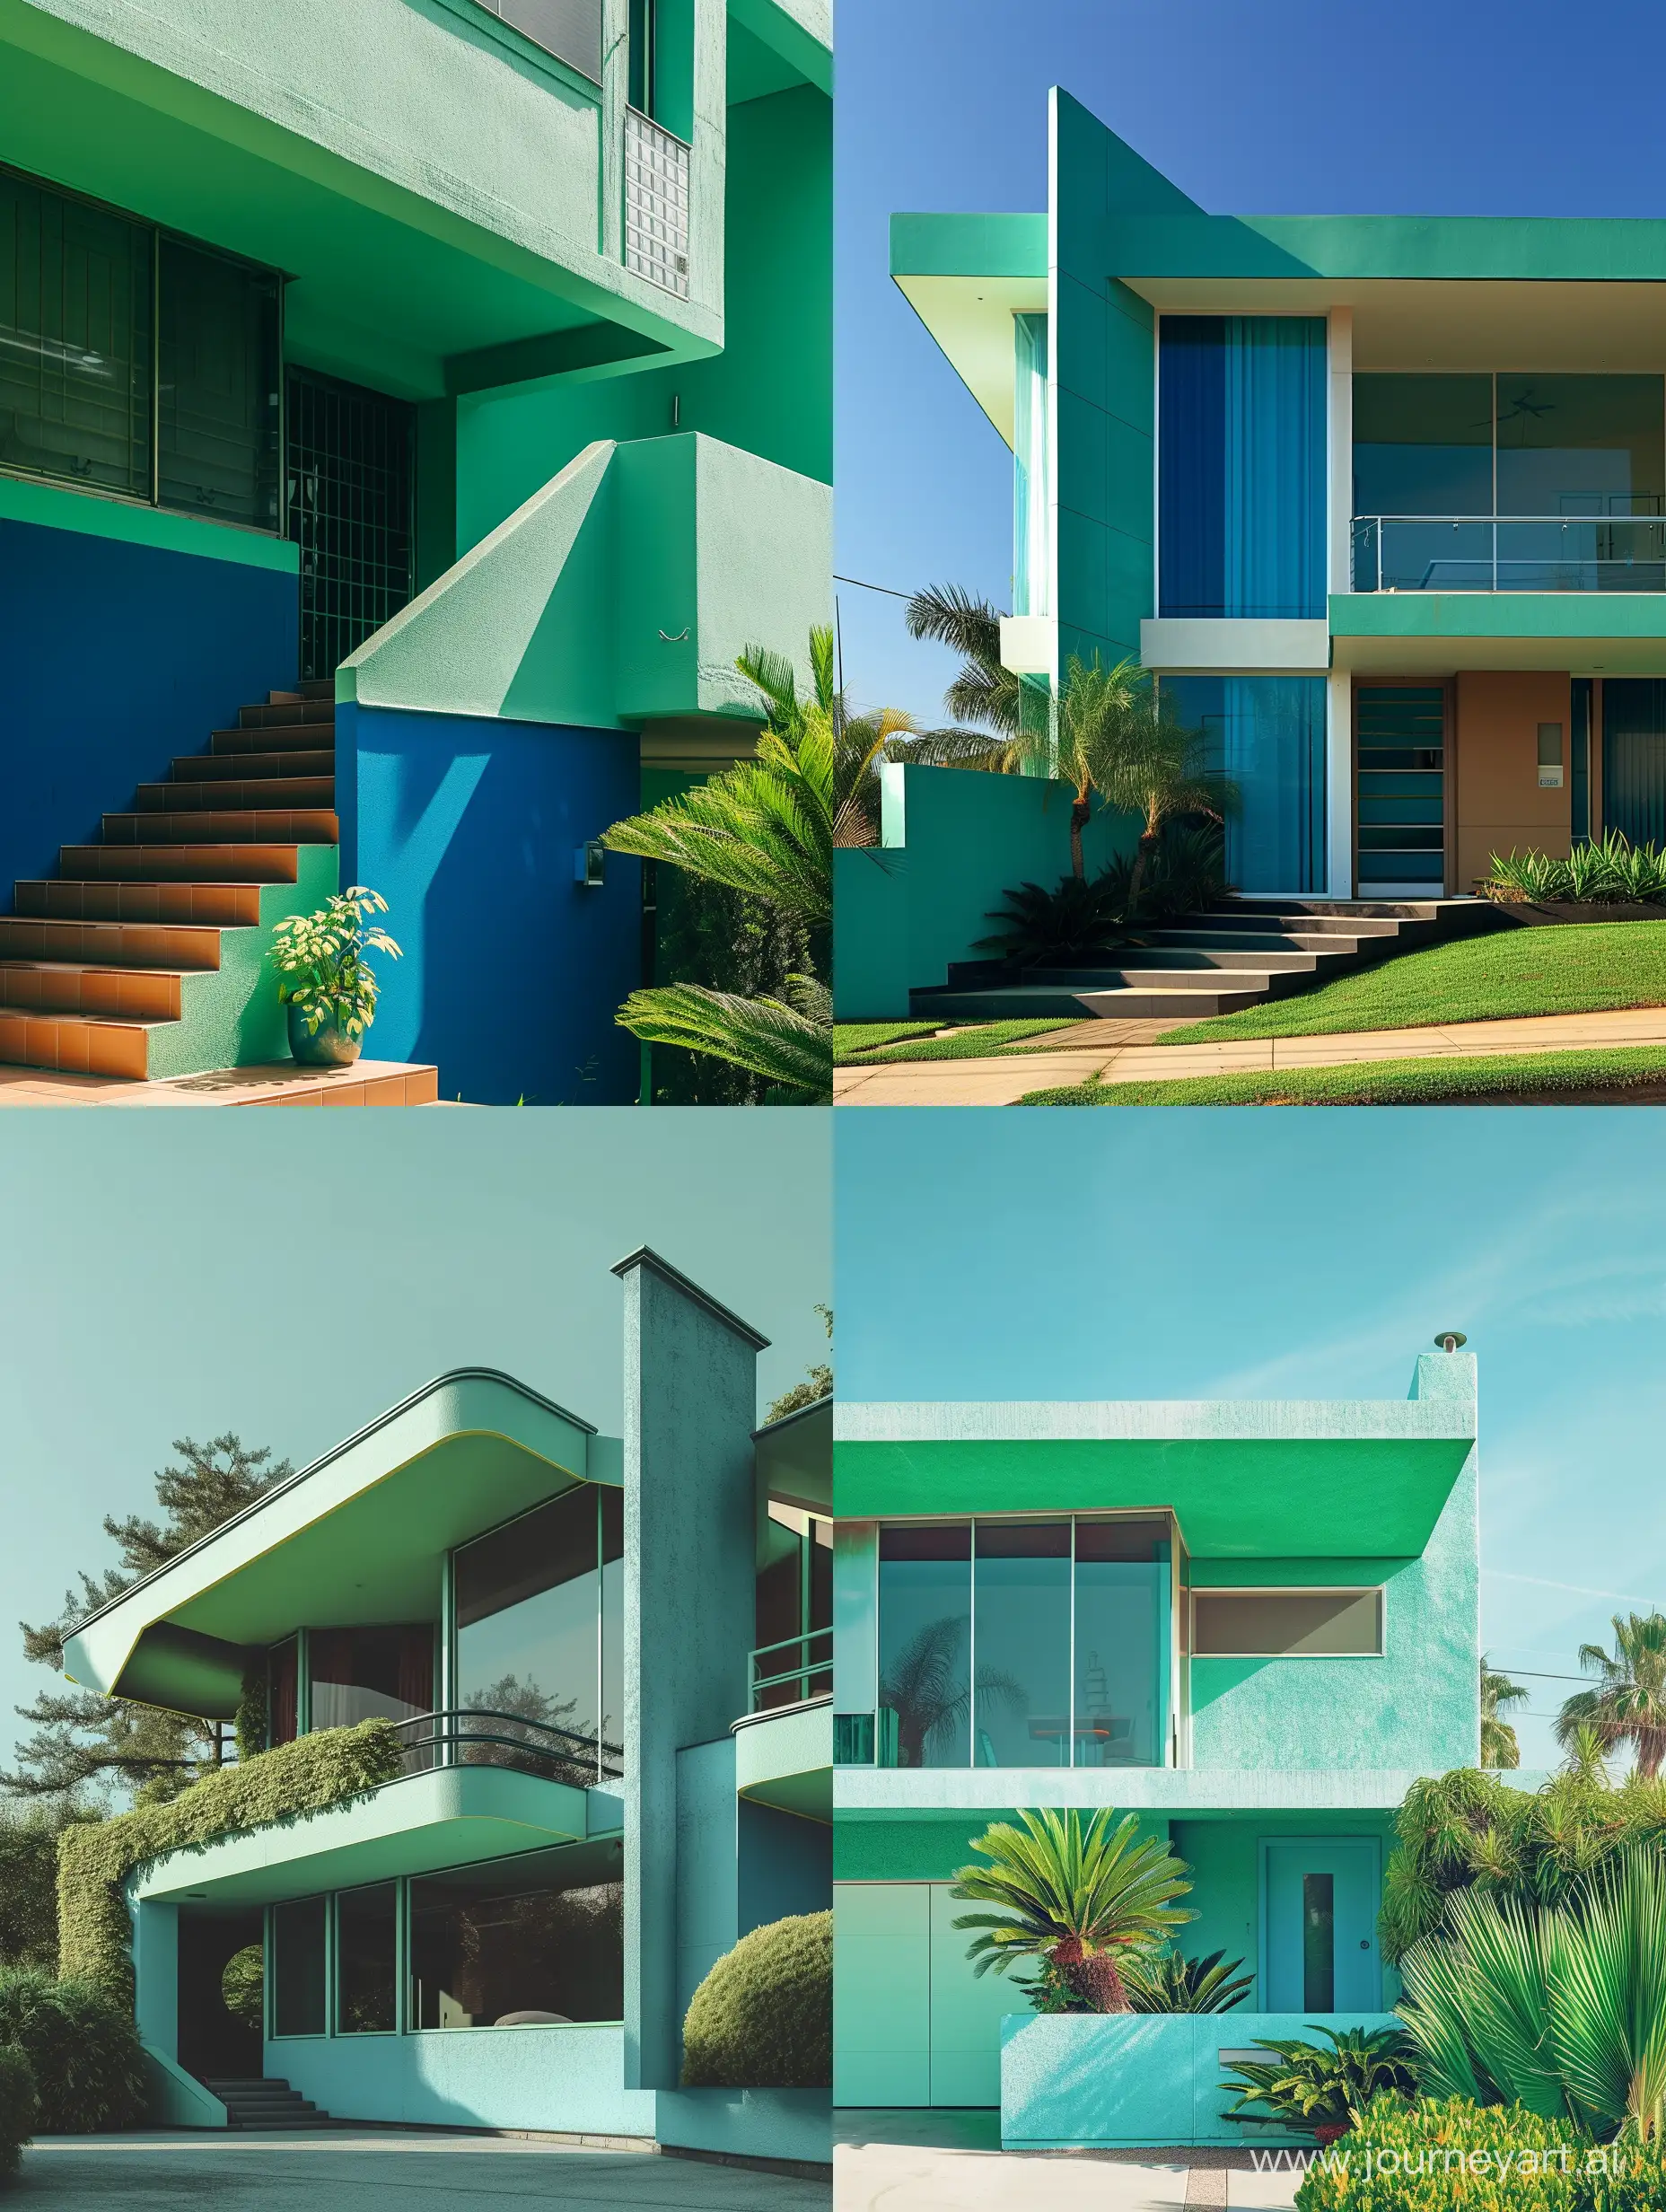 House, 70s style architecture, tone of green and blue